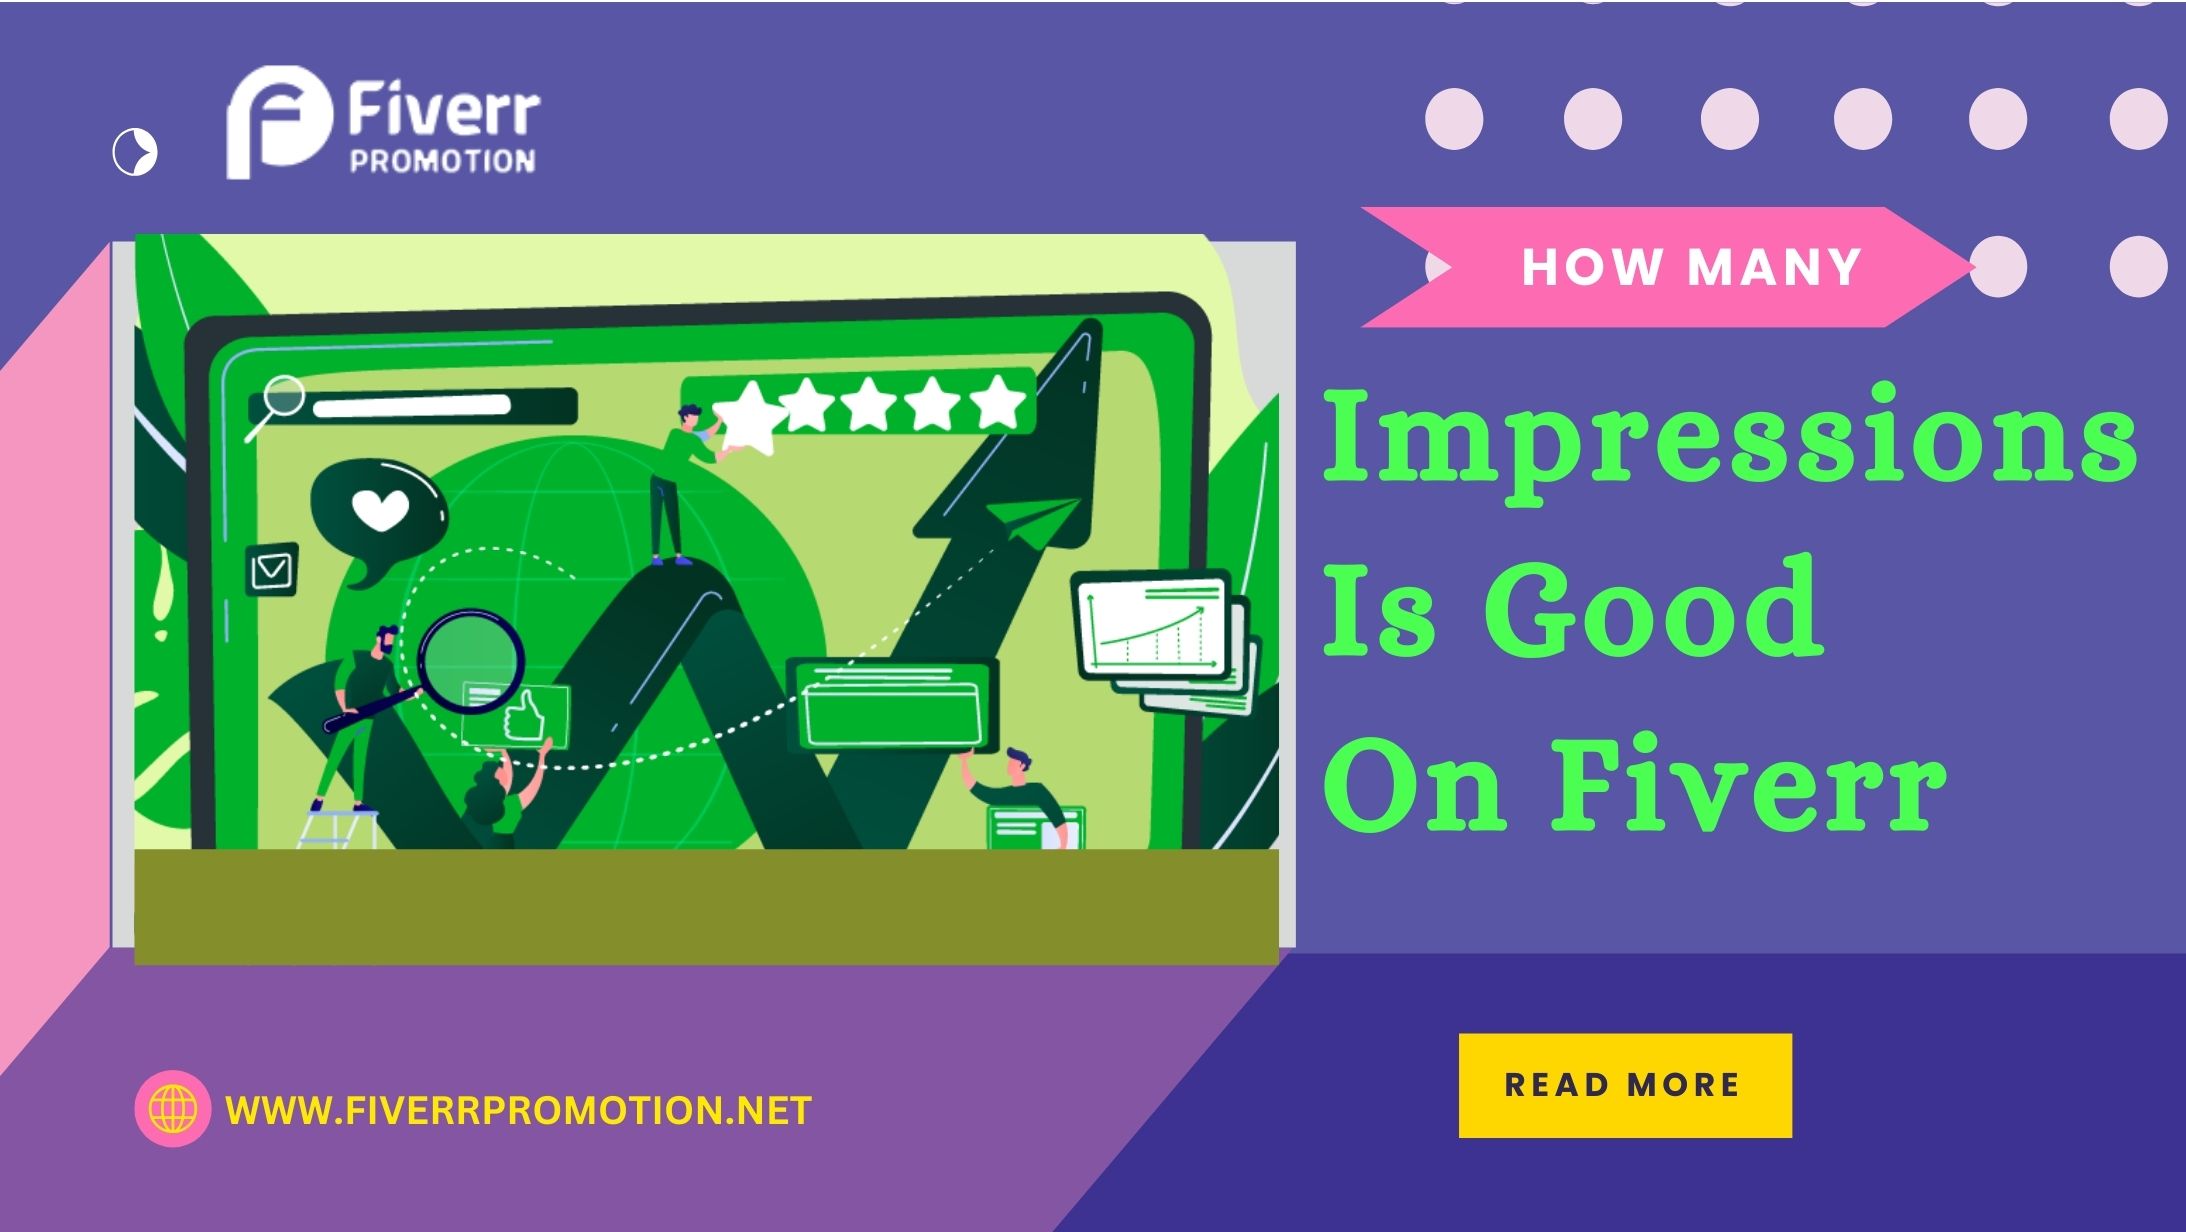 How Many Impressions Is Good on Fiverr